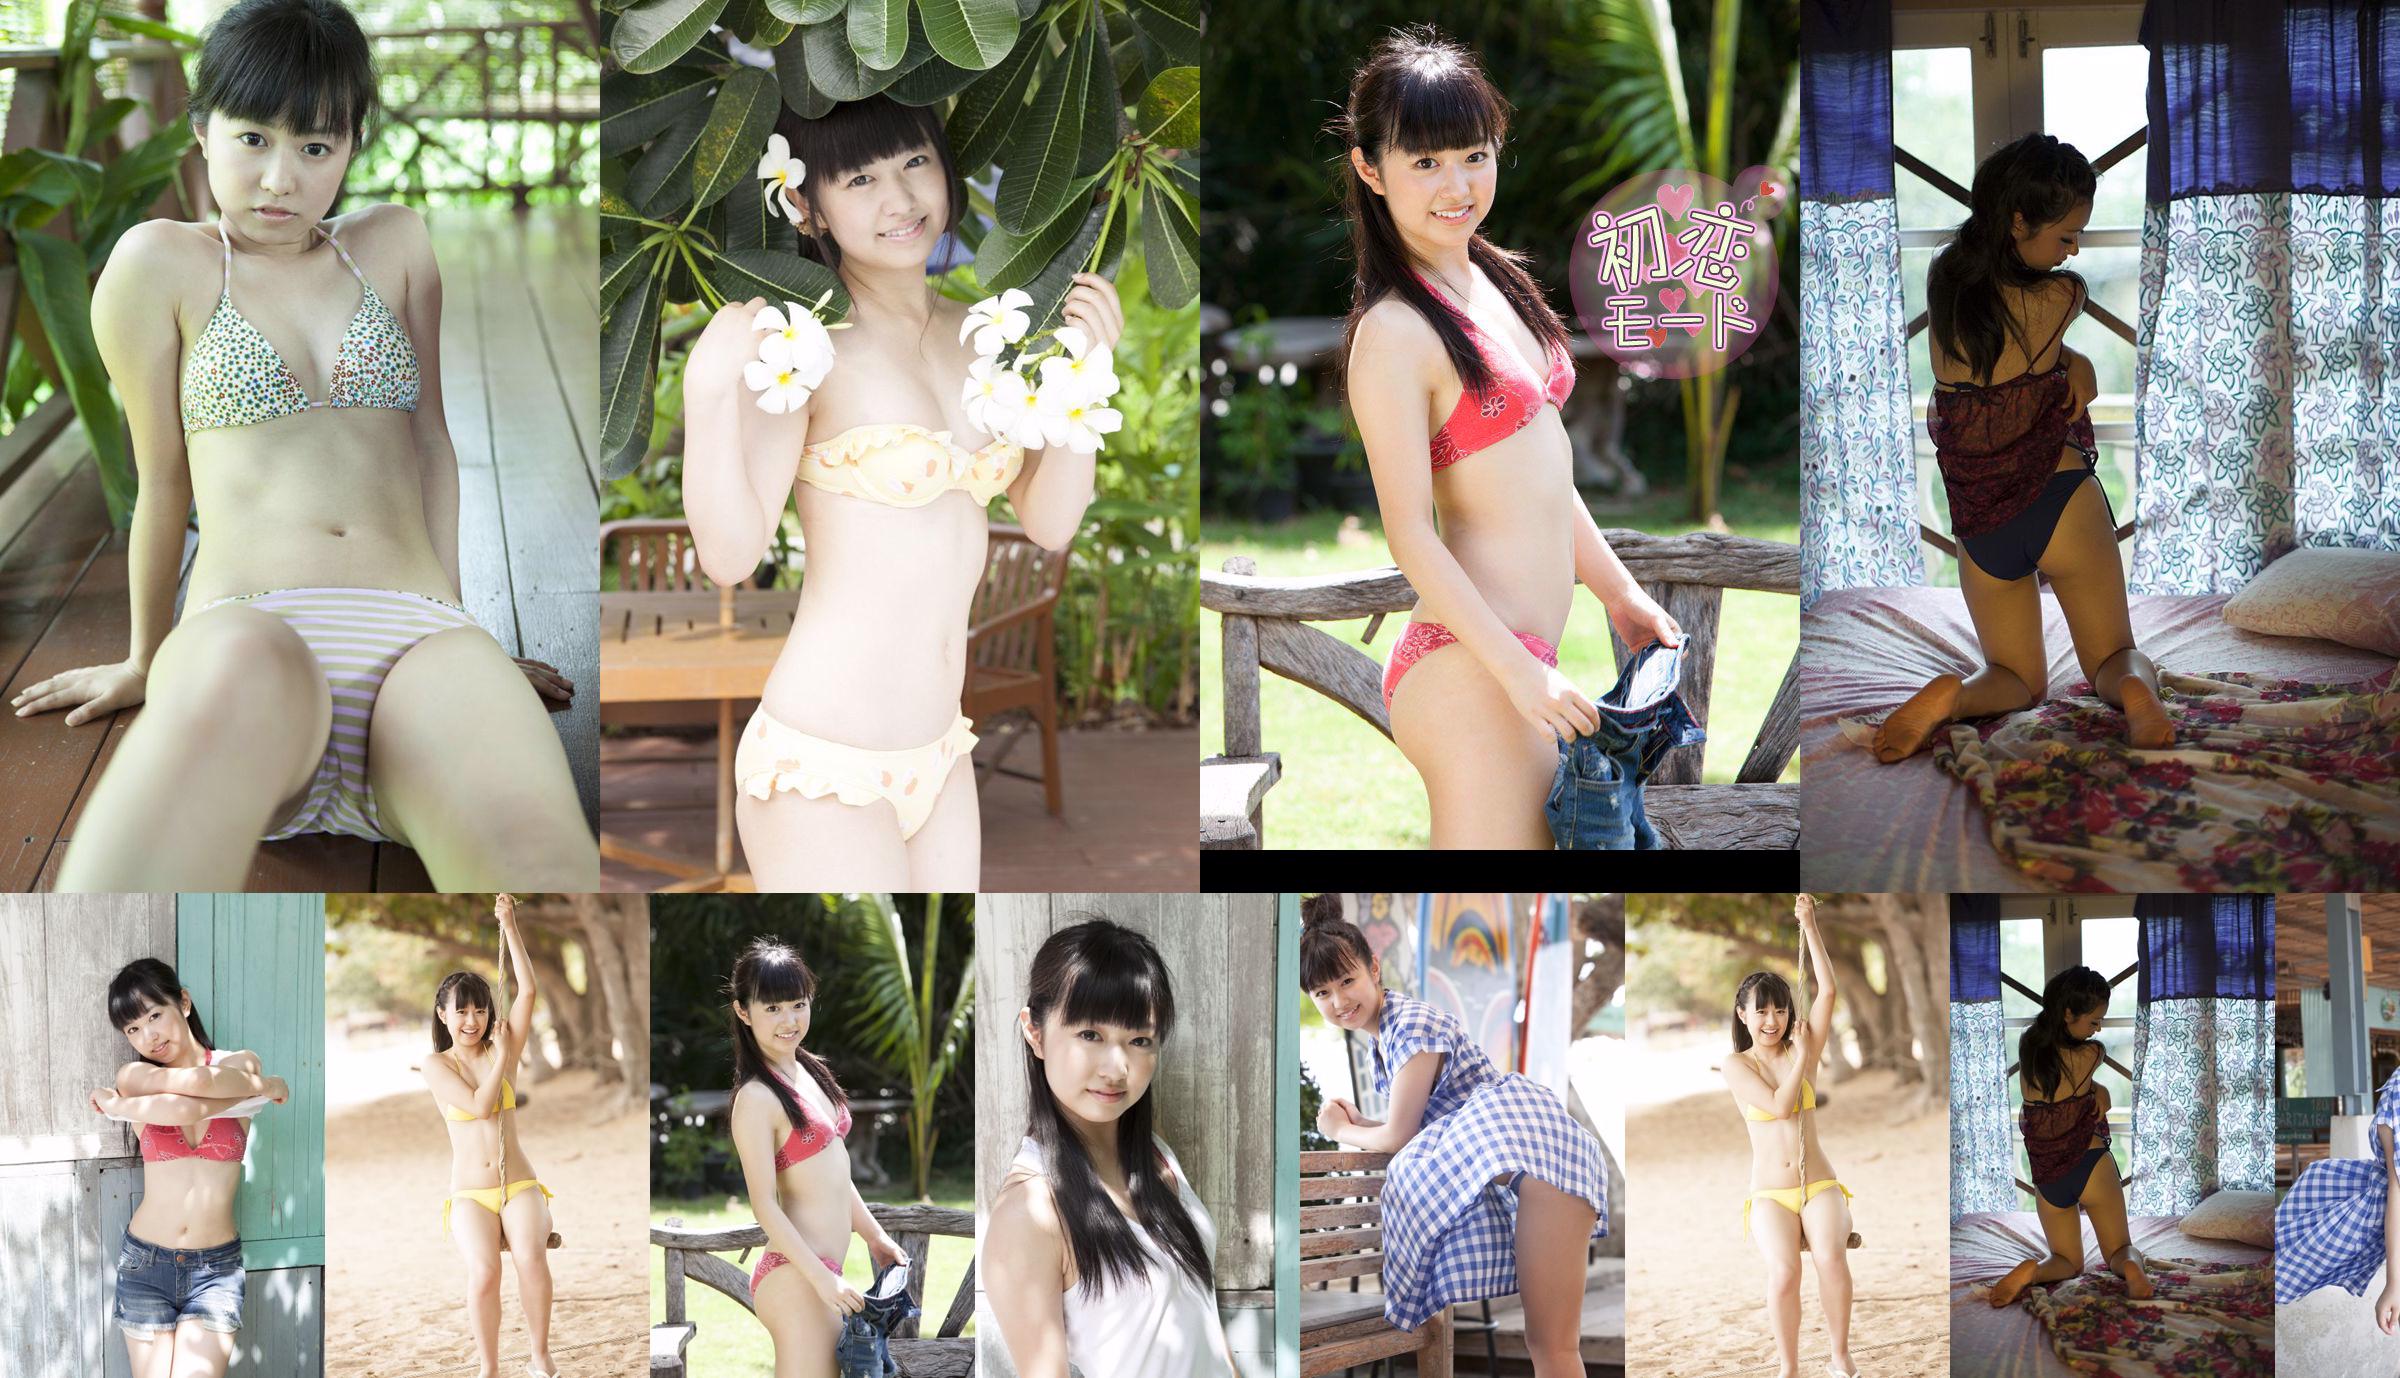 Manami Ikura "First Love Mode" Partie 2 [Image.tv] No.a8f255 Page 1